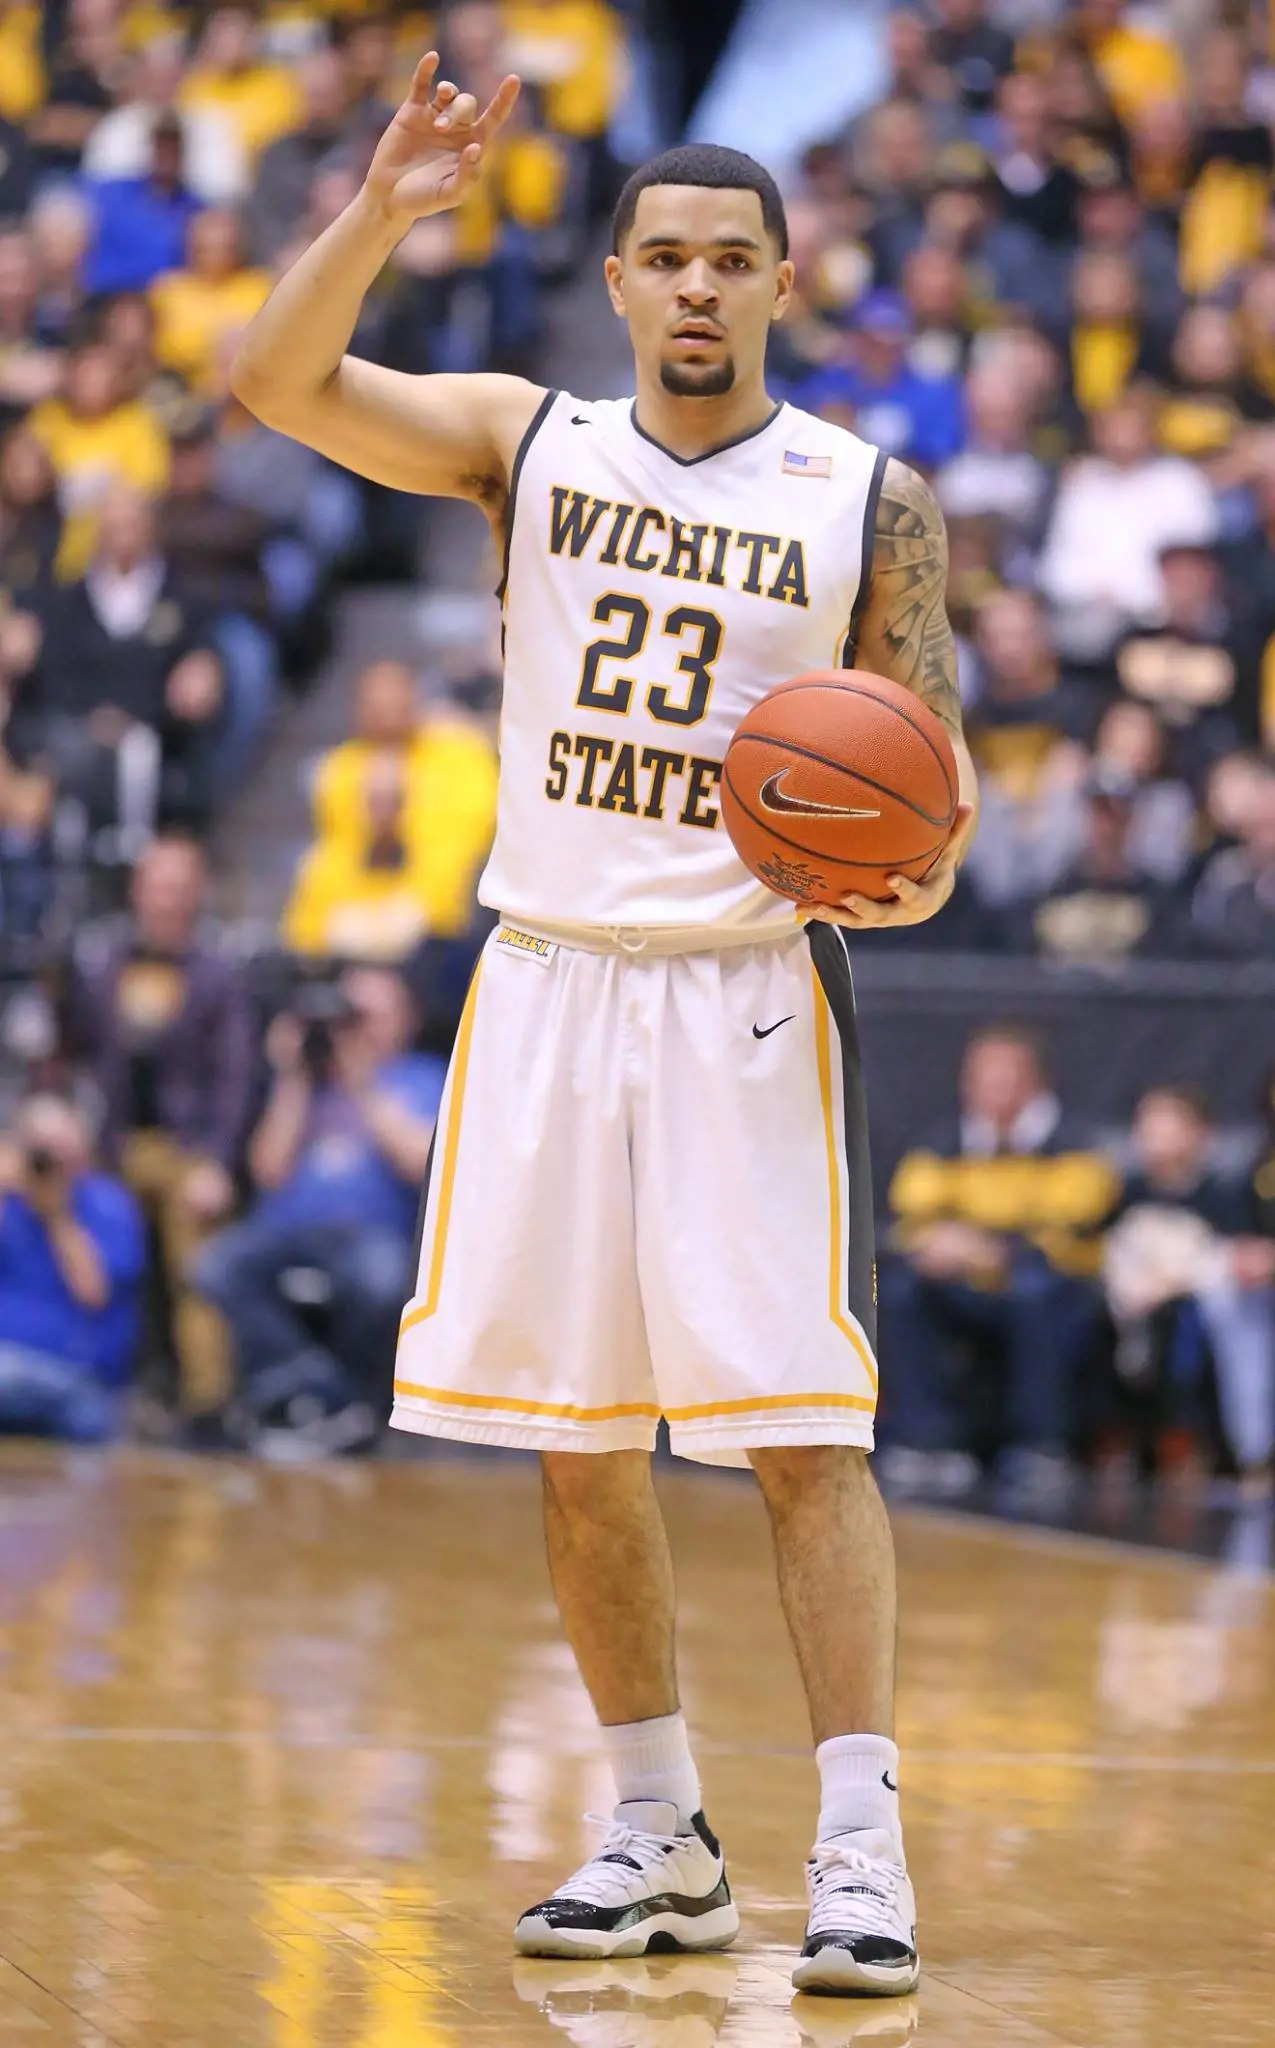 Fred played college basketball for Wichita State University.